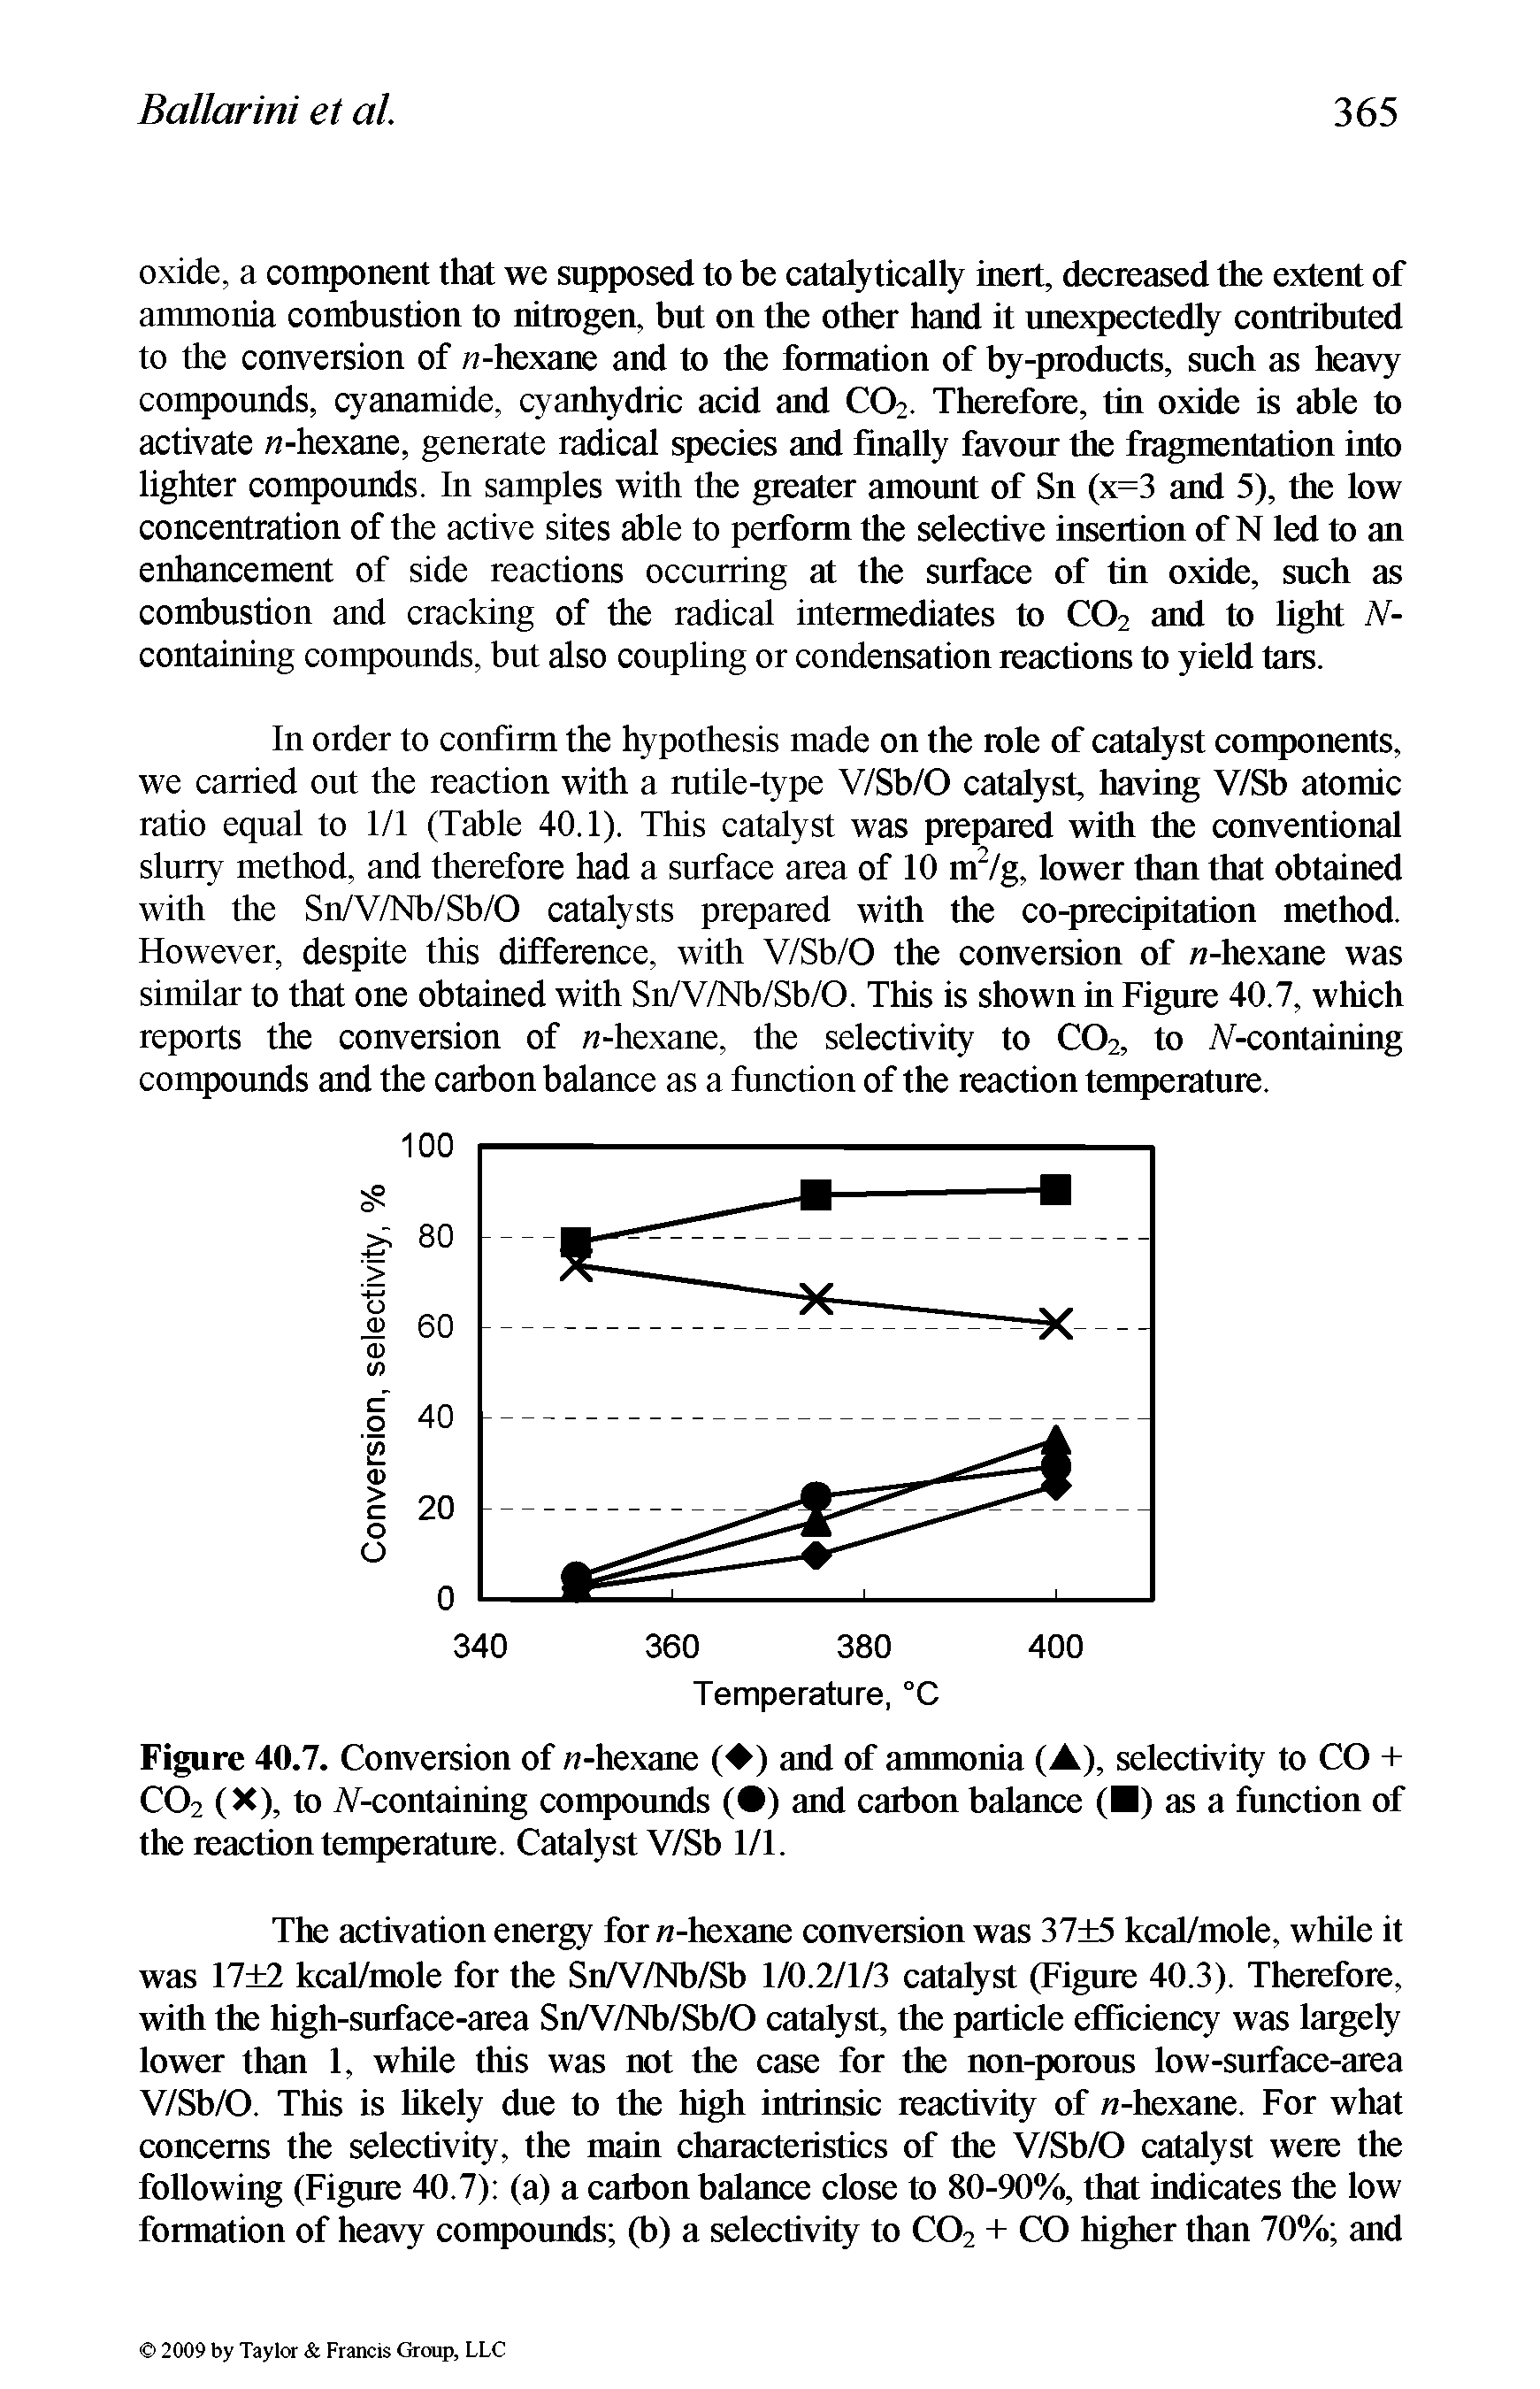 Figure 40.7. Conversion of n-hexane ( ) and of ammonia (A), selectivity to CO + CO2 (X), to /V-containing compounds ( ) and carbon balance ( ) as a function of the reaction temperature. Catalyst V/Sb 1/1.